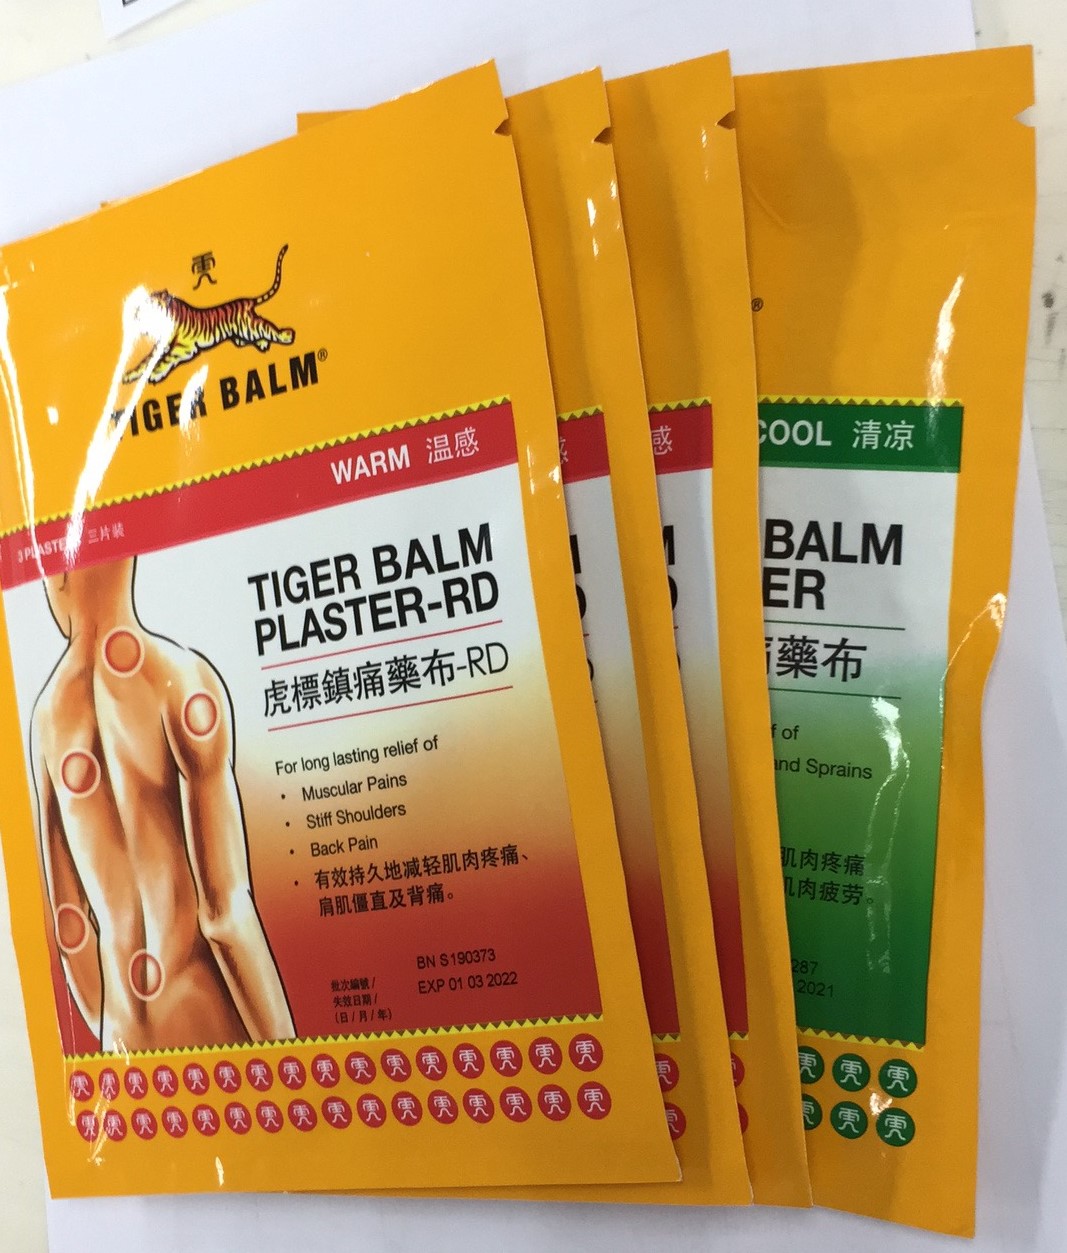 Tiger balm 10 X 14 CM 27 patches warm for long lasting relief of pain